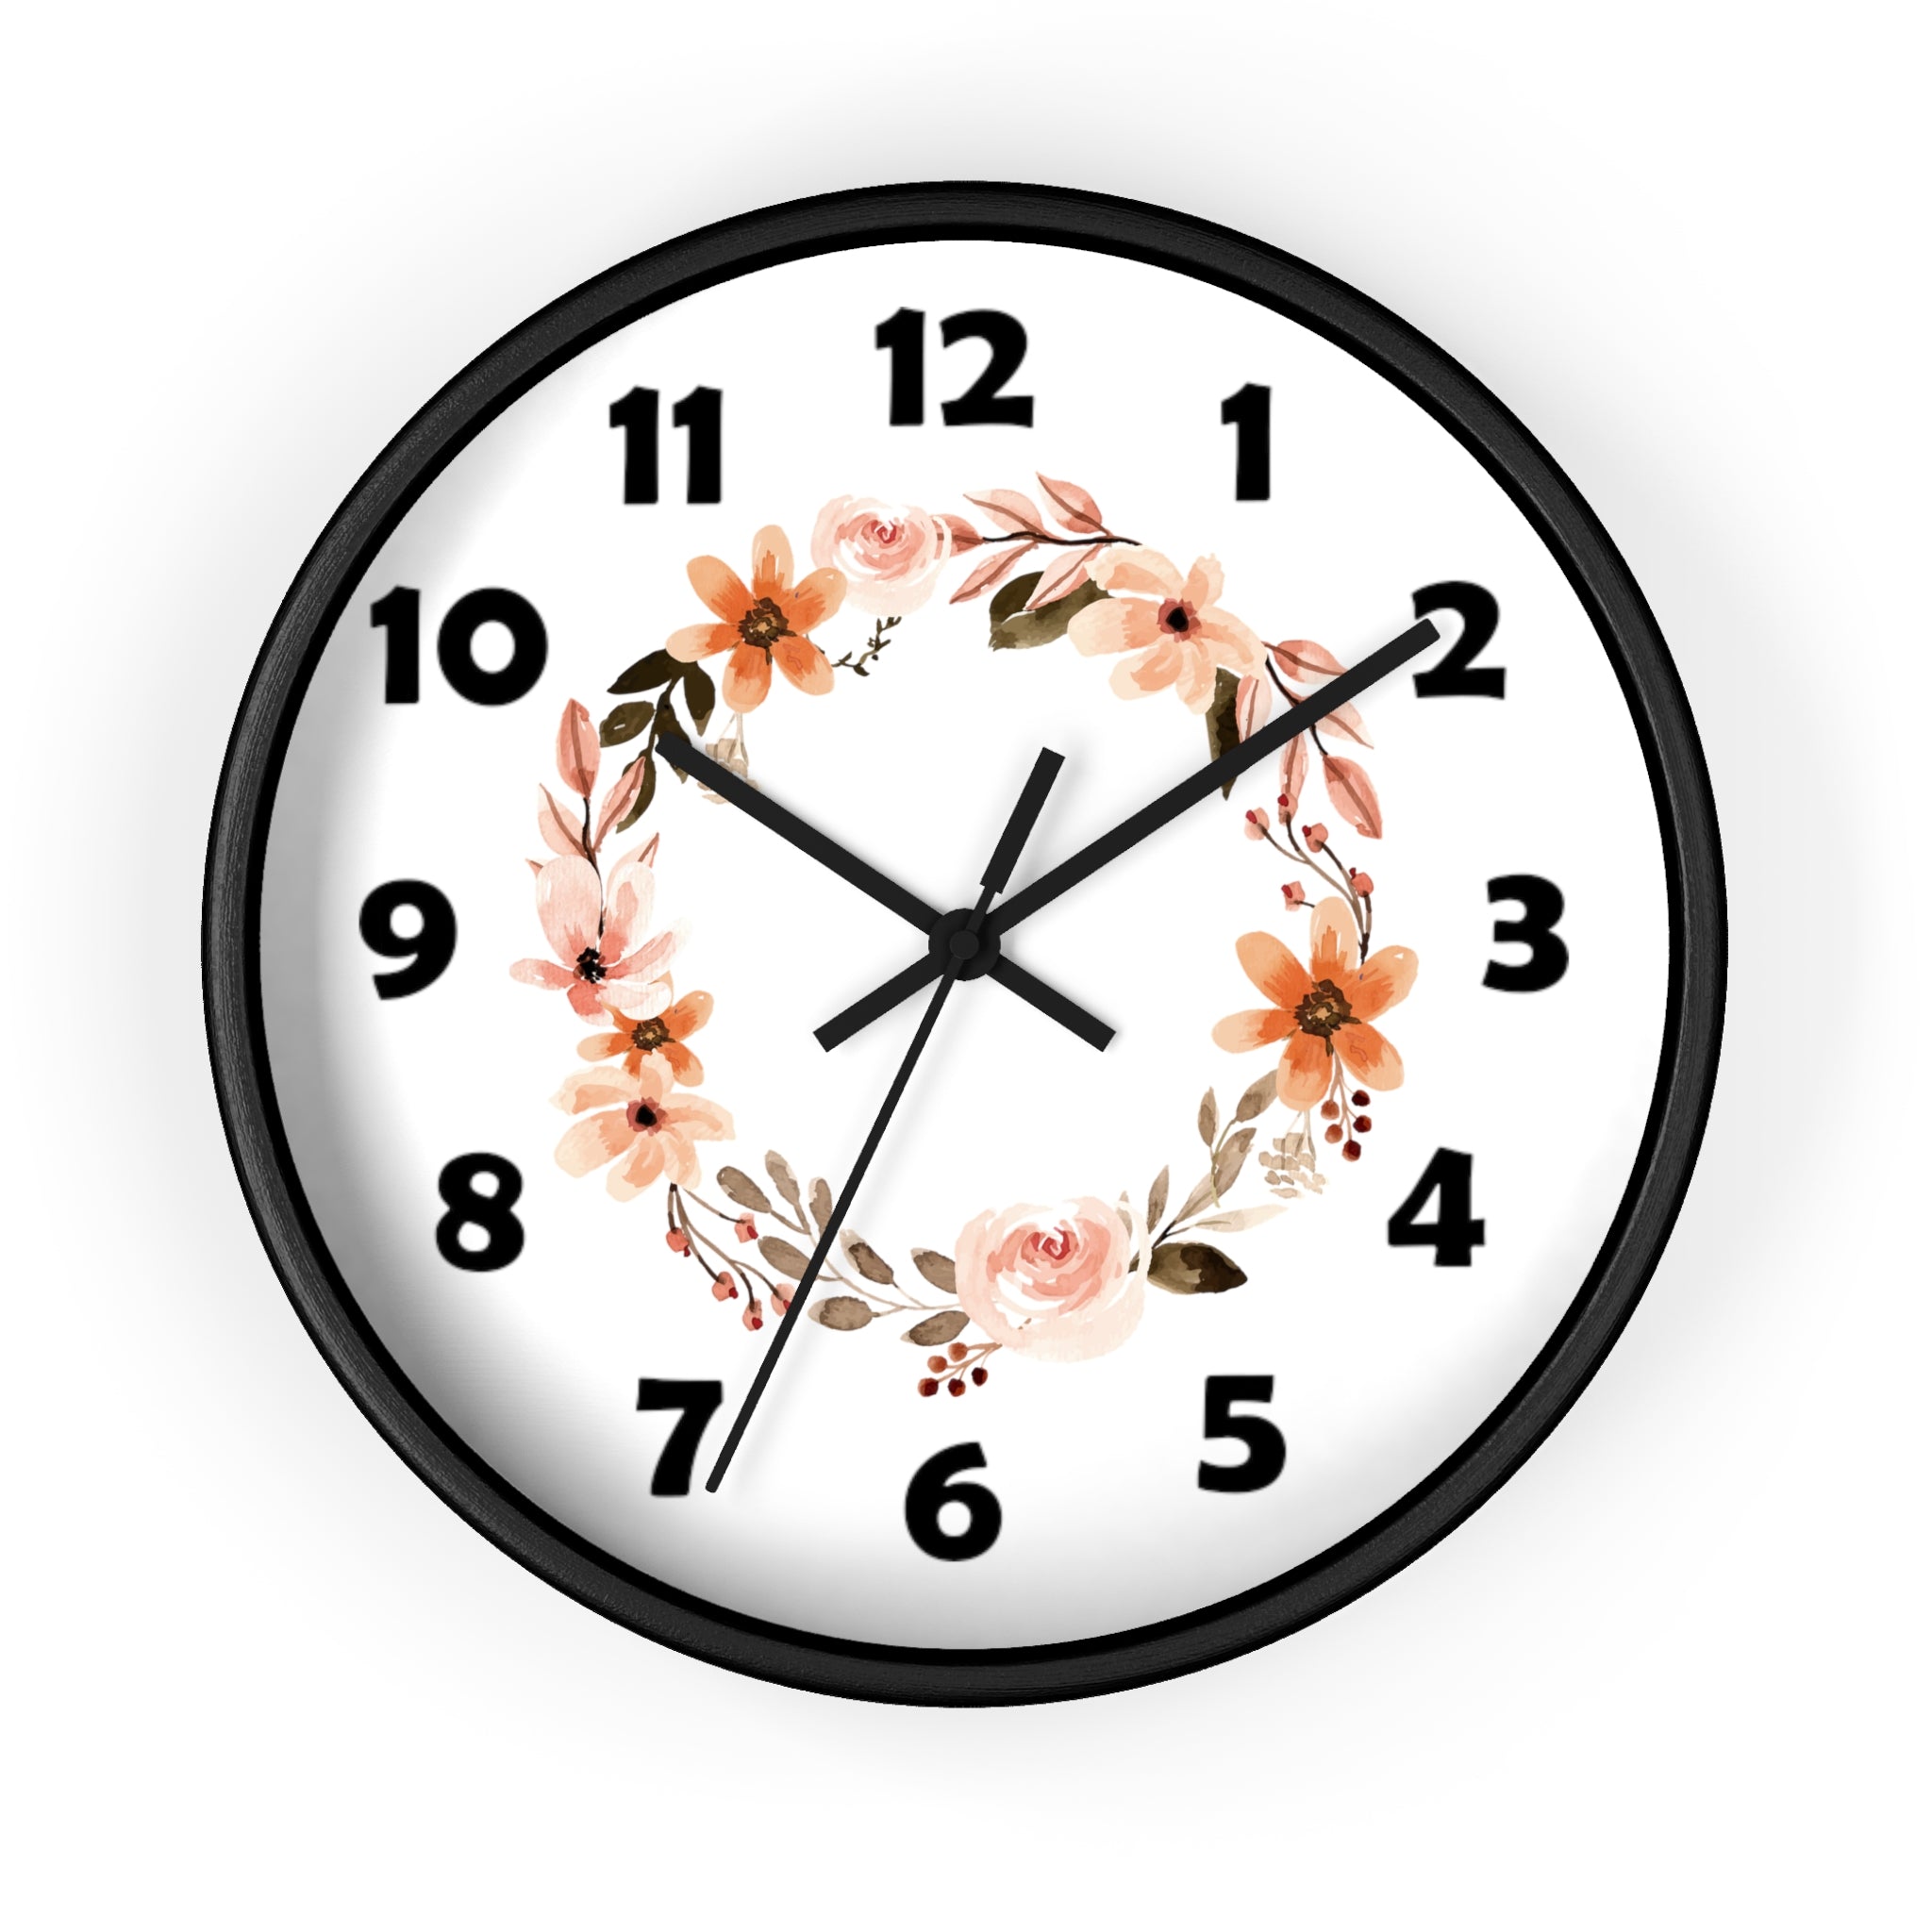 10 inch round wall clock with a circle ring of flowers